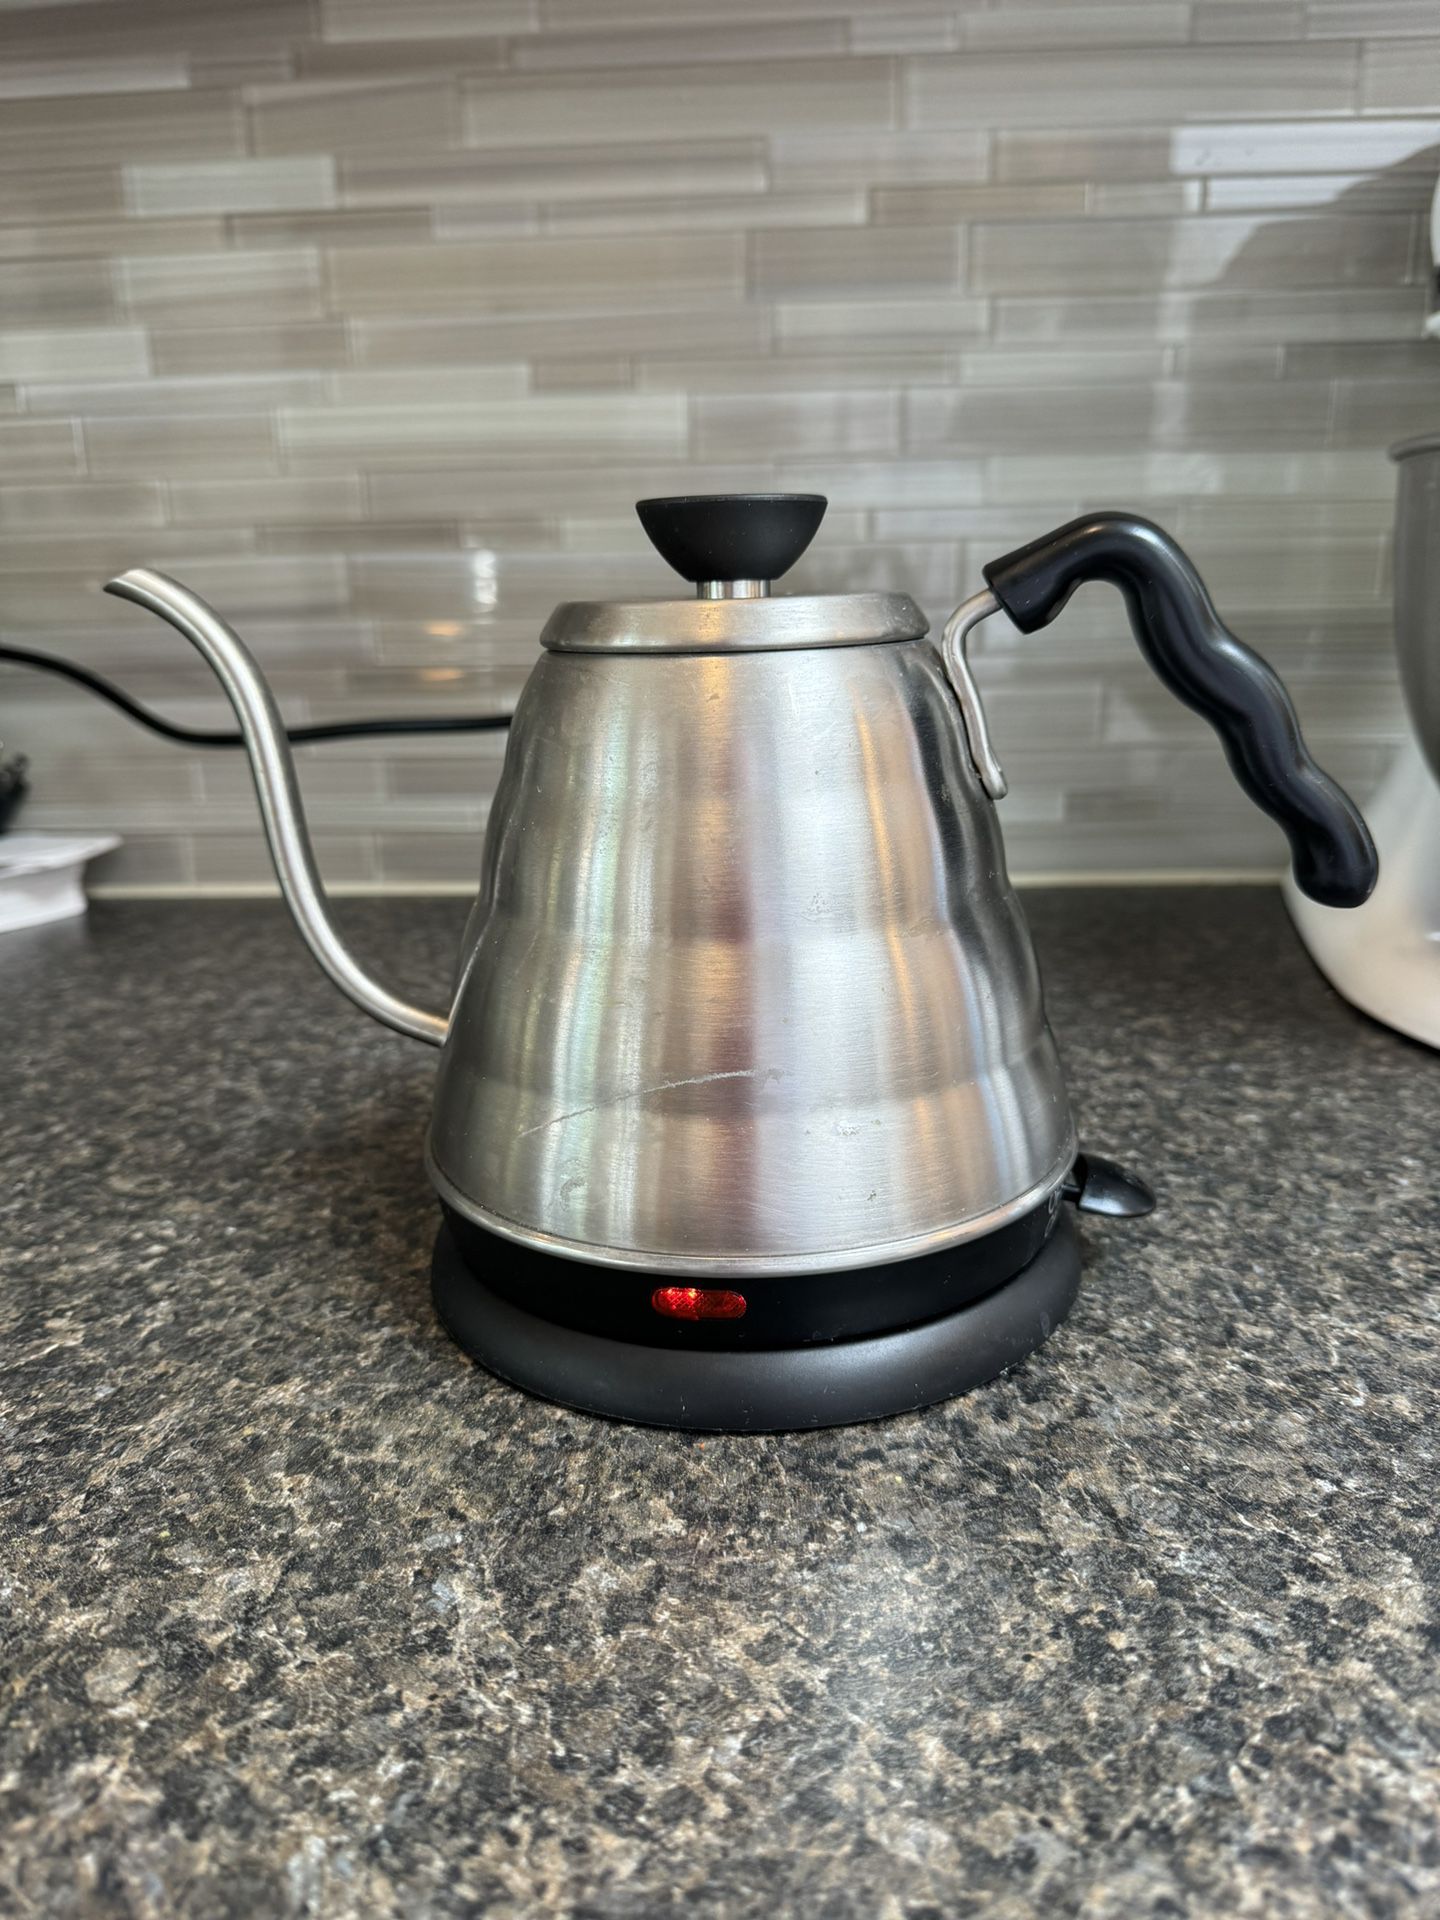 Electric Kettle - Hario 